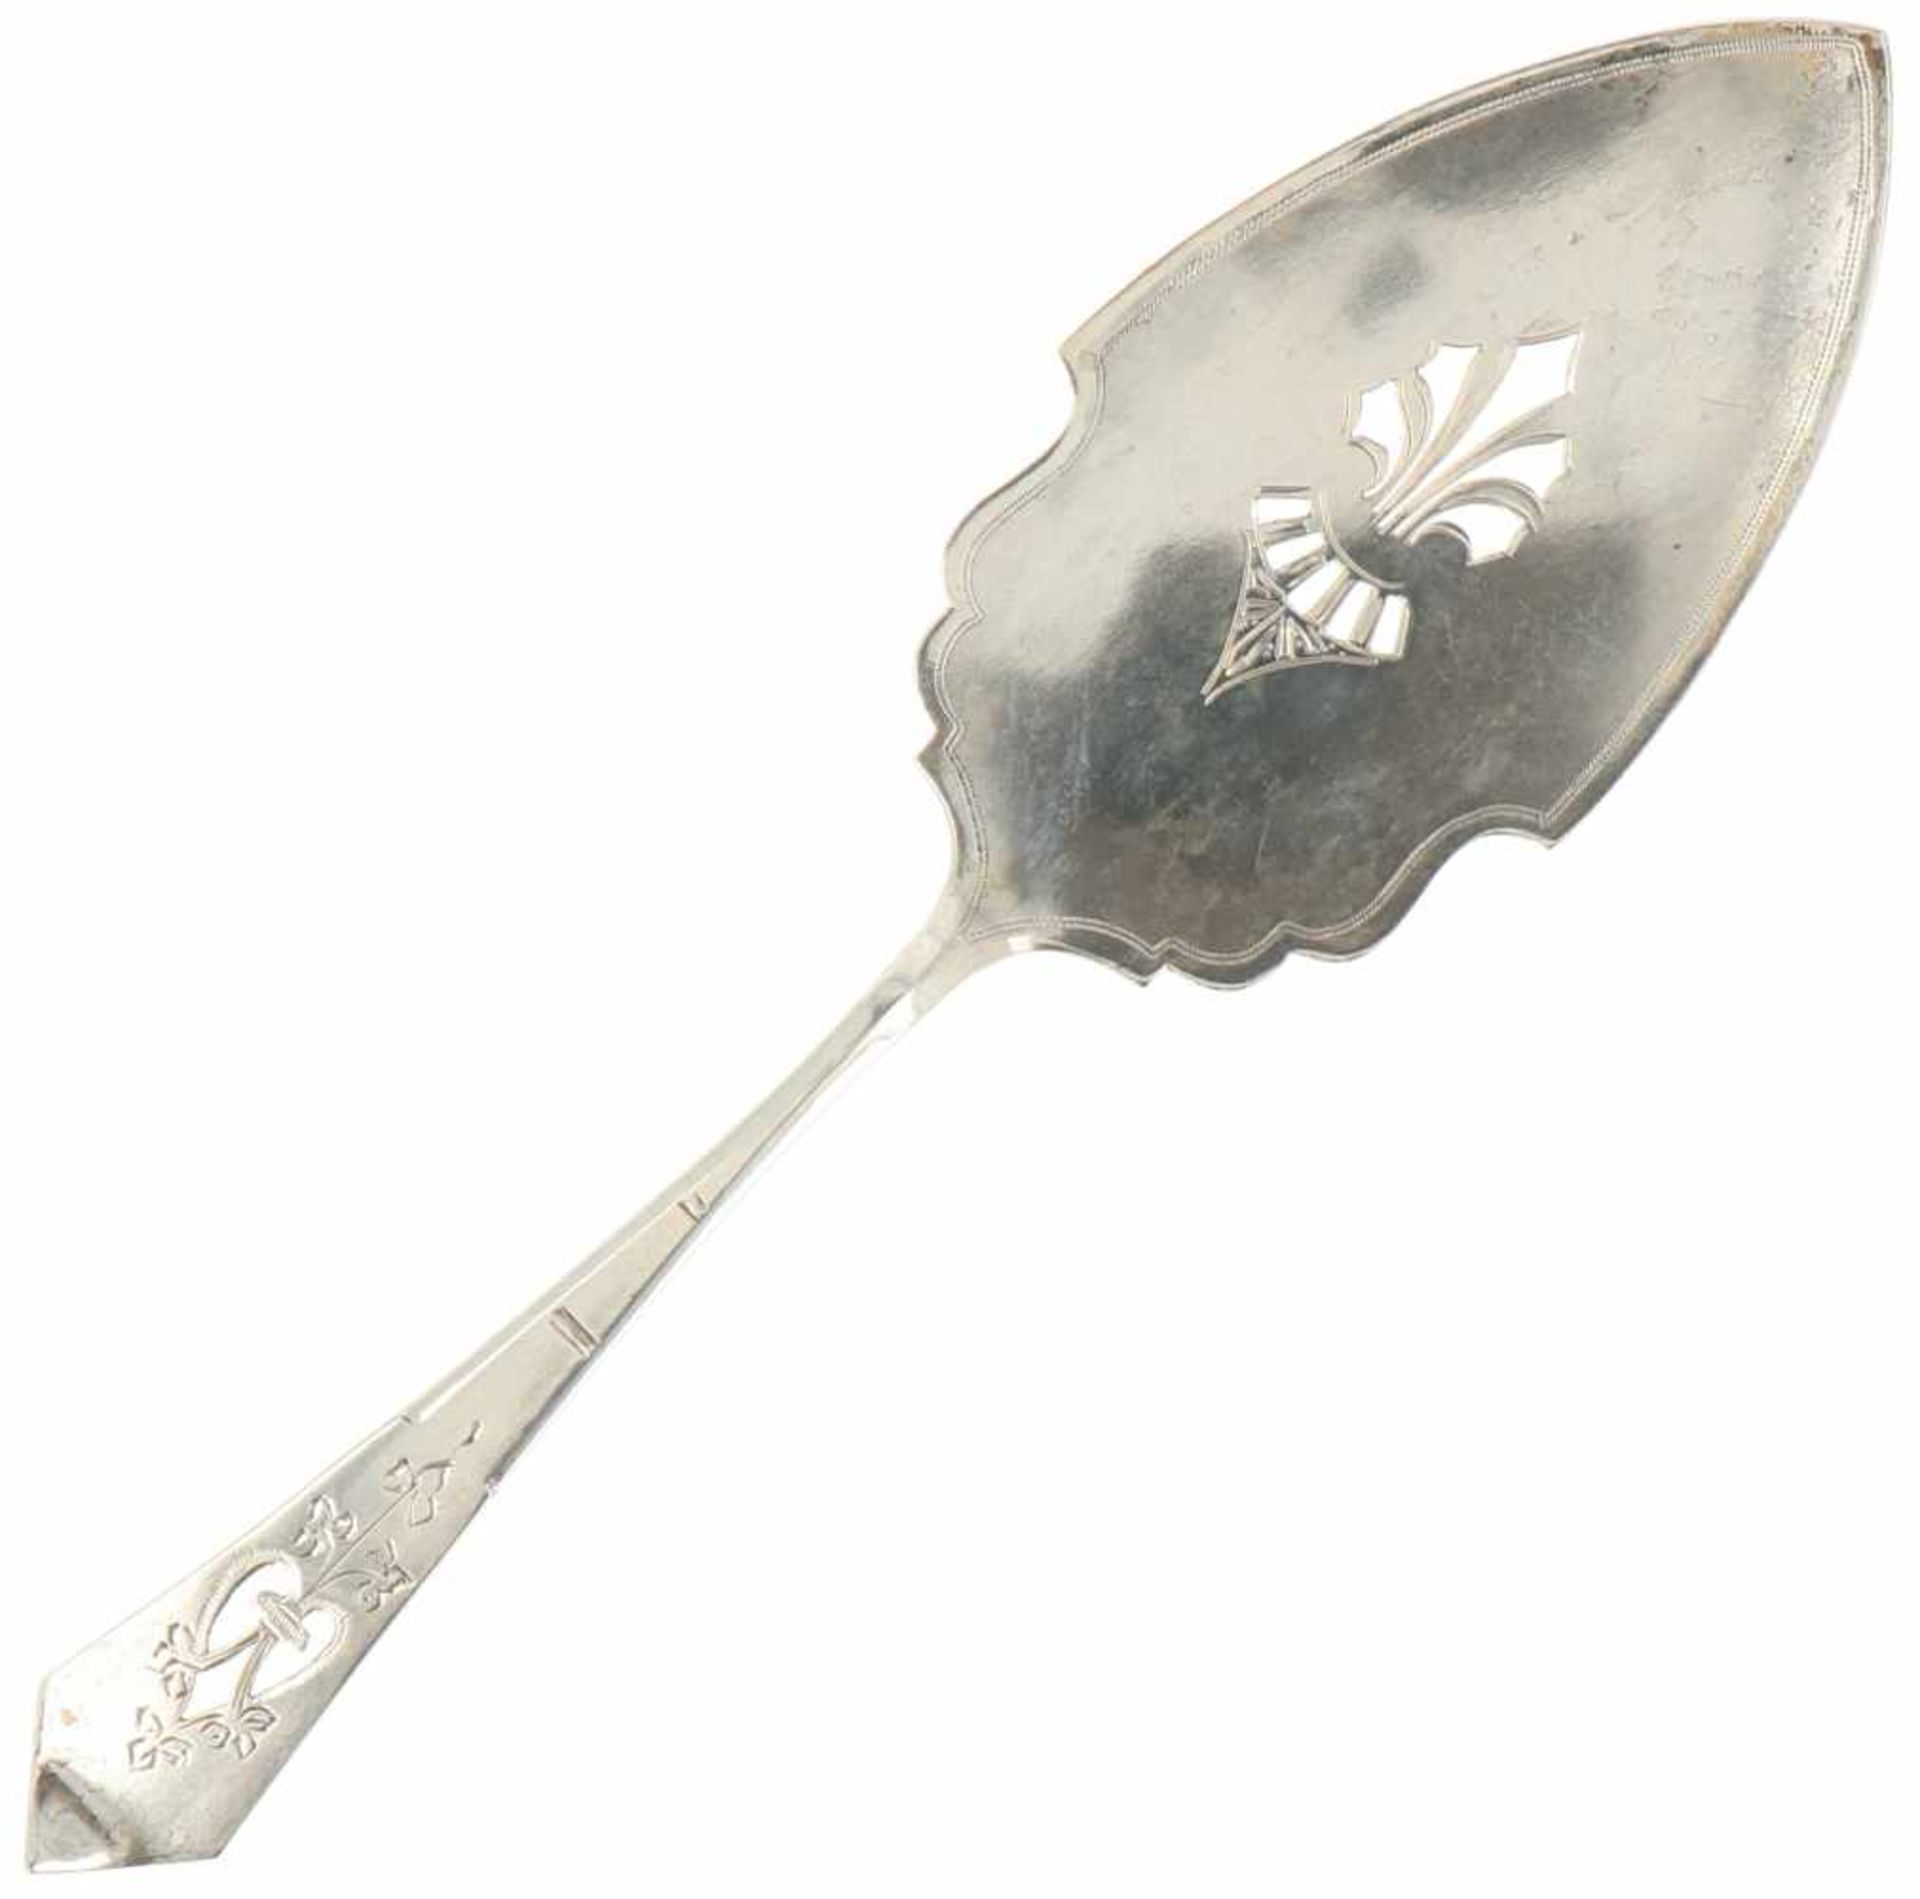 Silver pastry scoop.